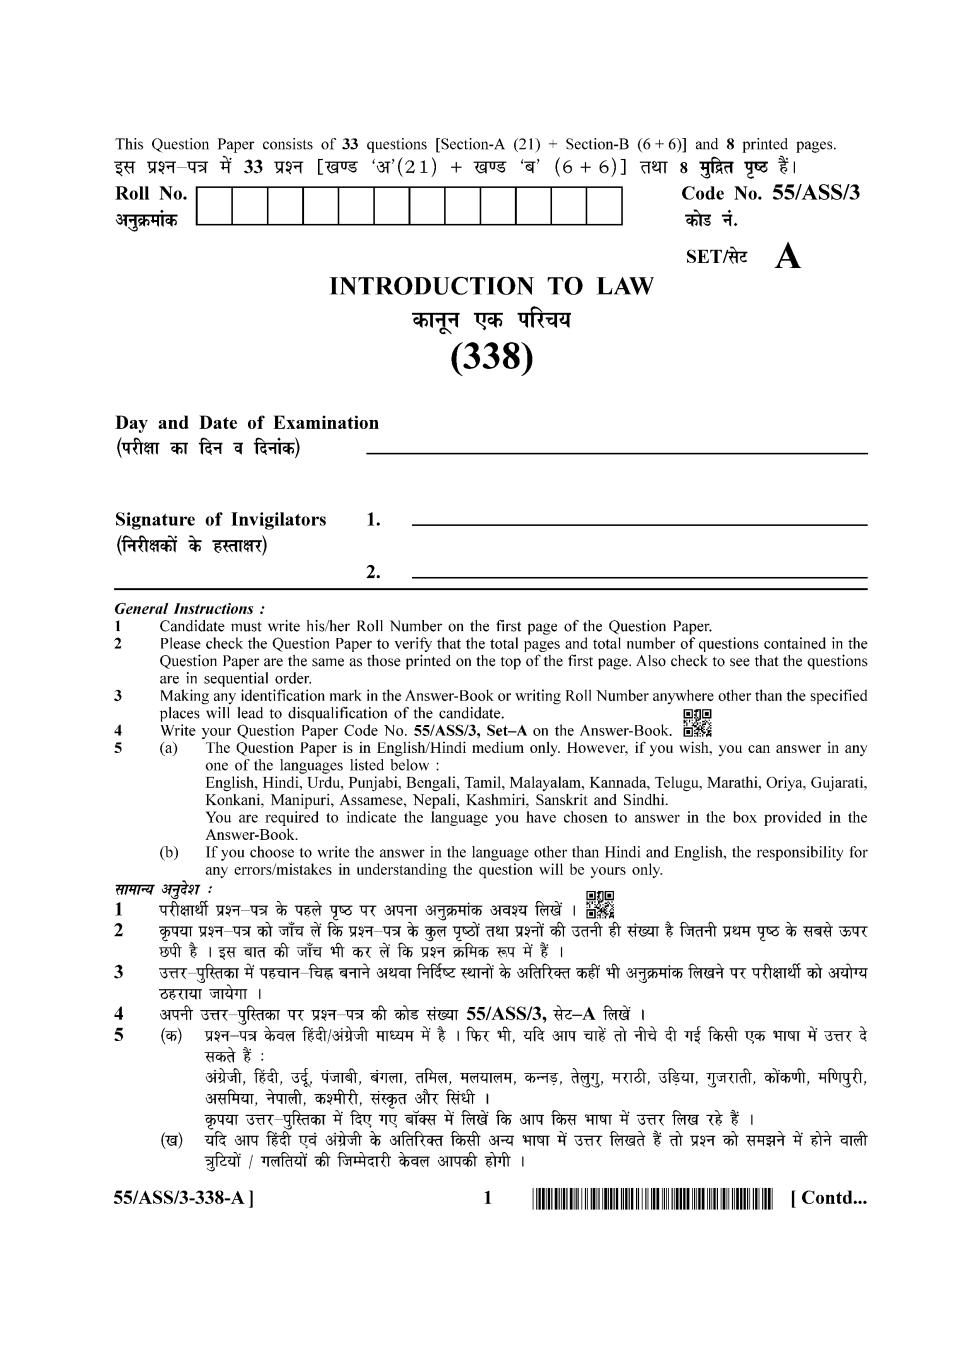 NIOS Class 12 Question Paper Oct 2017 - Introduction to Law - Page 1